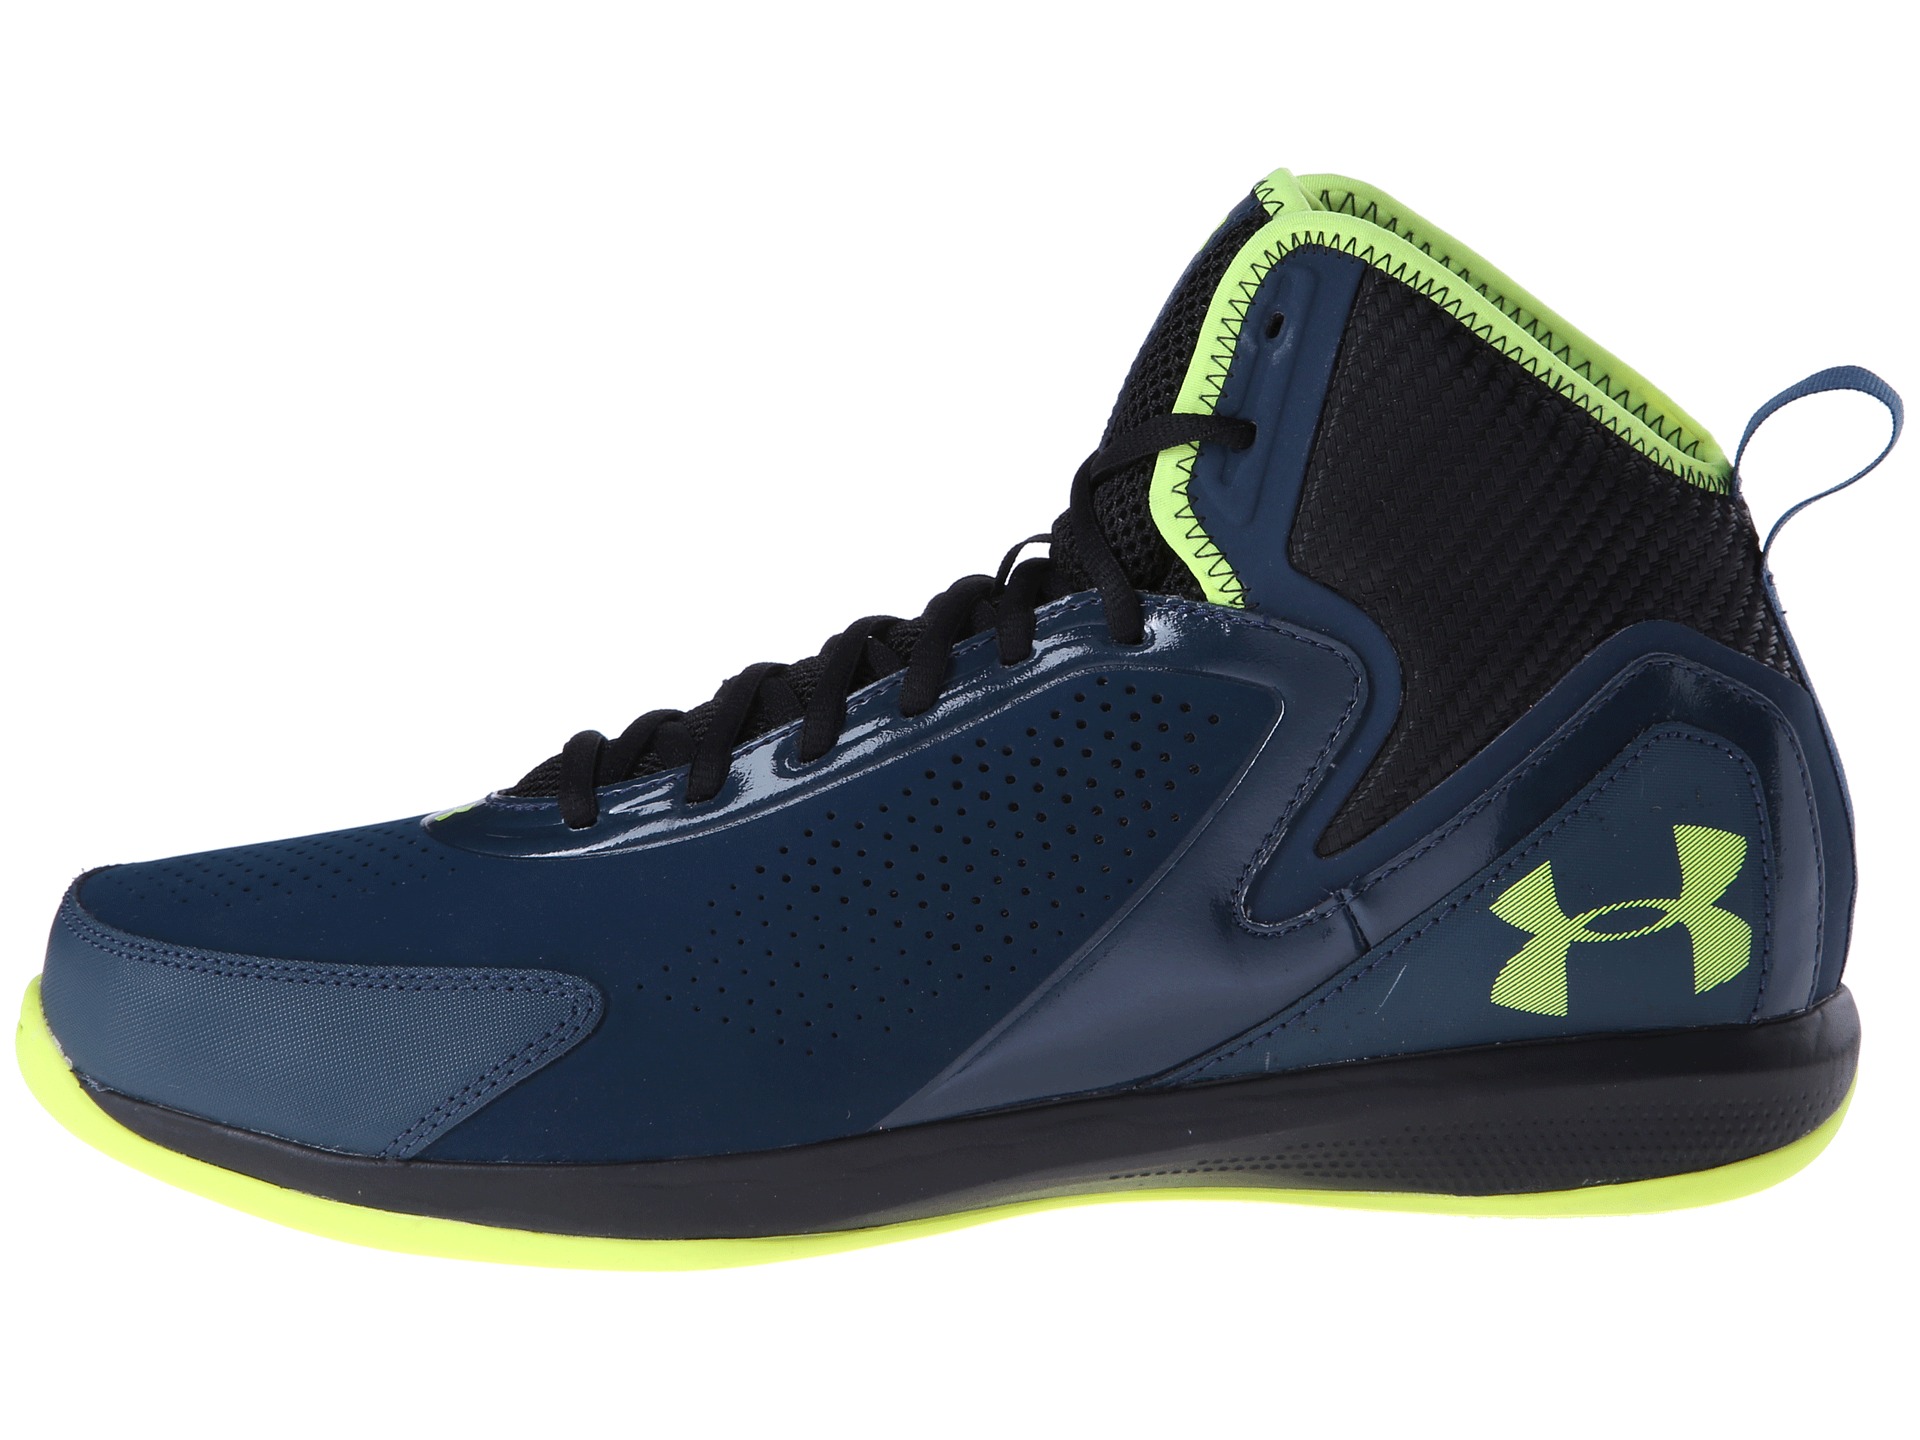 Under Armour Ua Jet 2 | Shipped Free at Zappos